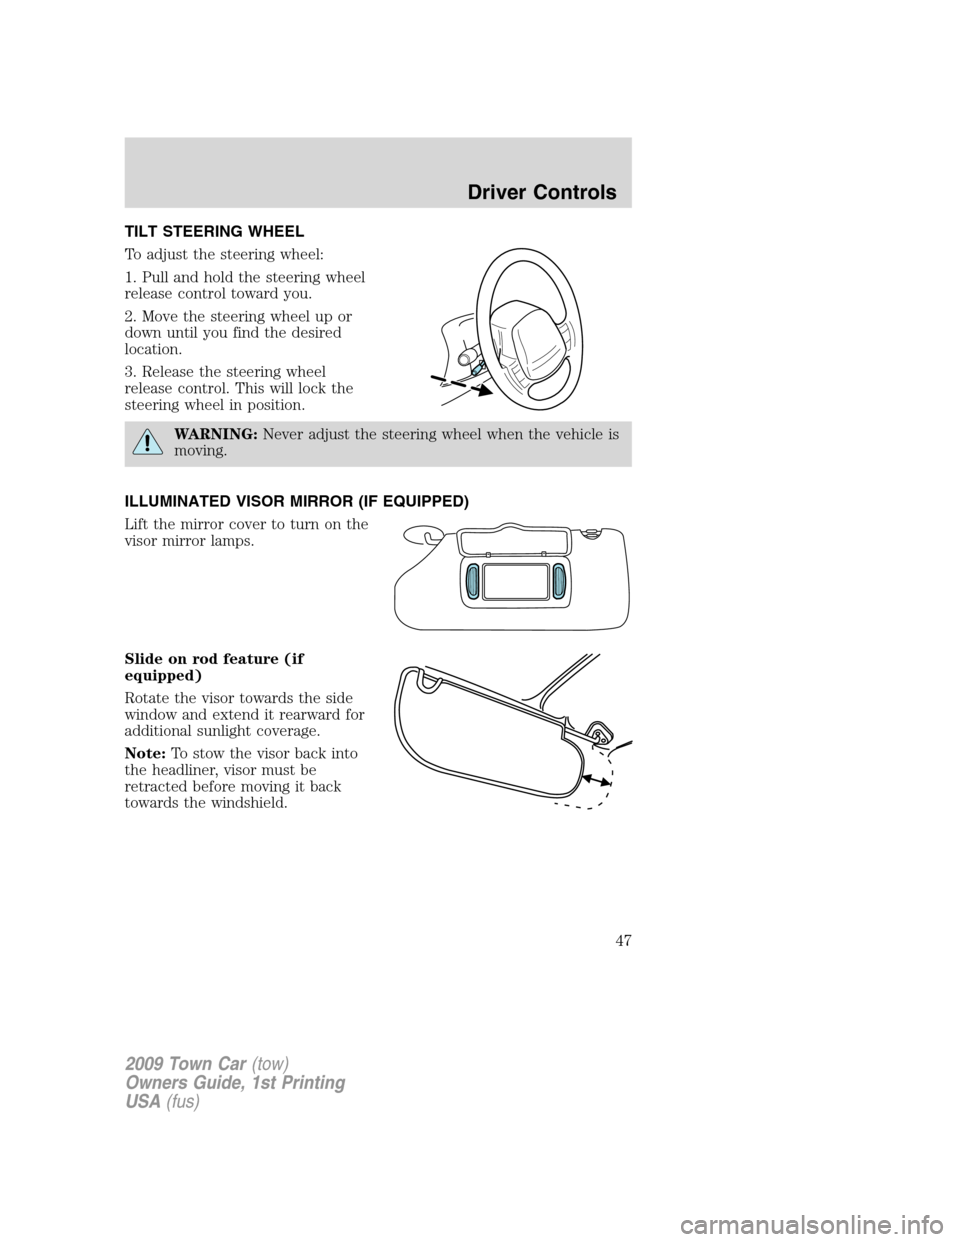 LINCOLN TOWN CAR 2009  Owners Manual TILT STEERING WHEEL
To adjust the steering wheel:
1. Pull and hold the steering wheel
release control toward you.
2. Move the steering wheel up or
down until you find the desired
location.
3. Release 